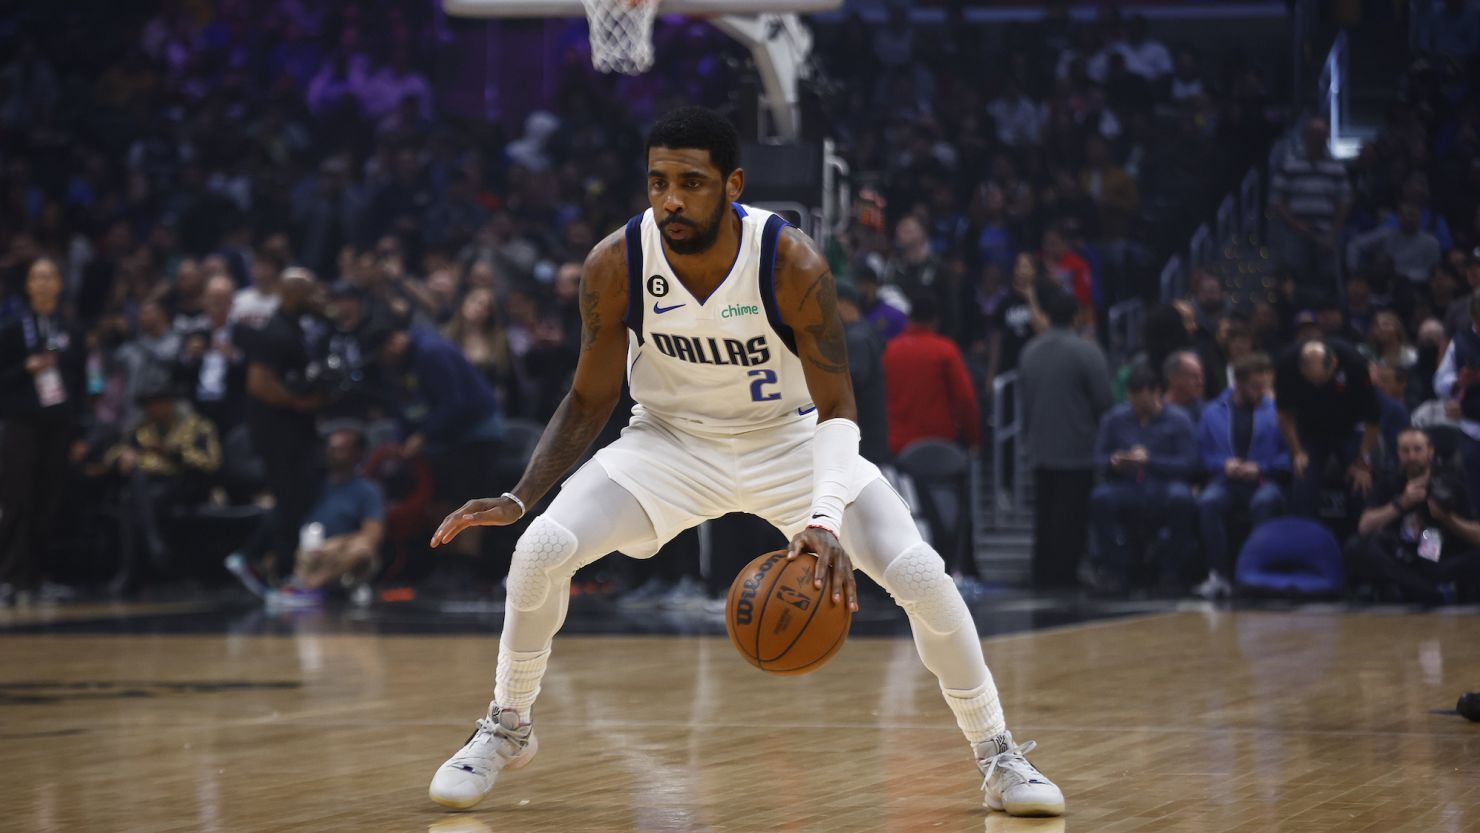 Kyrie Irving helped the Dallas Mavericks to victory over the Los Angeles Clippers in his first game for the franchise.